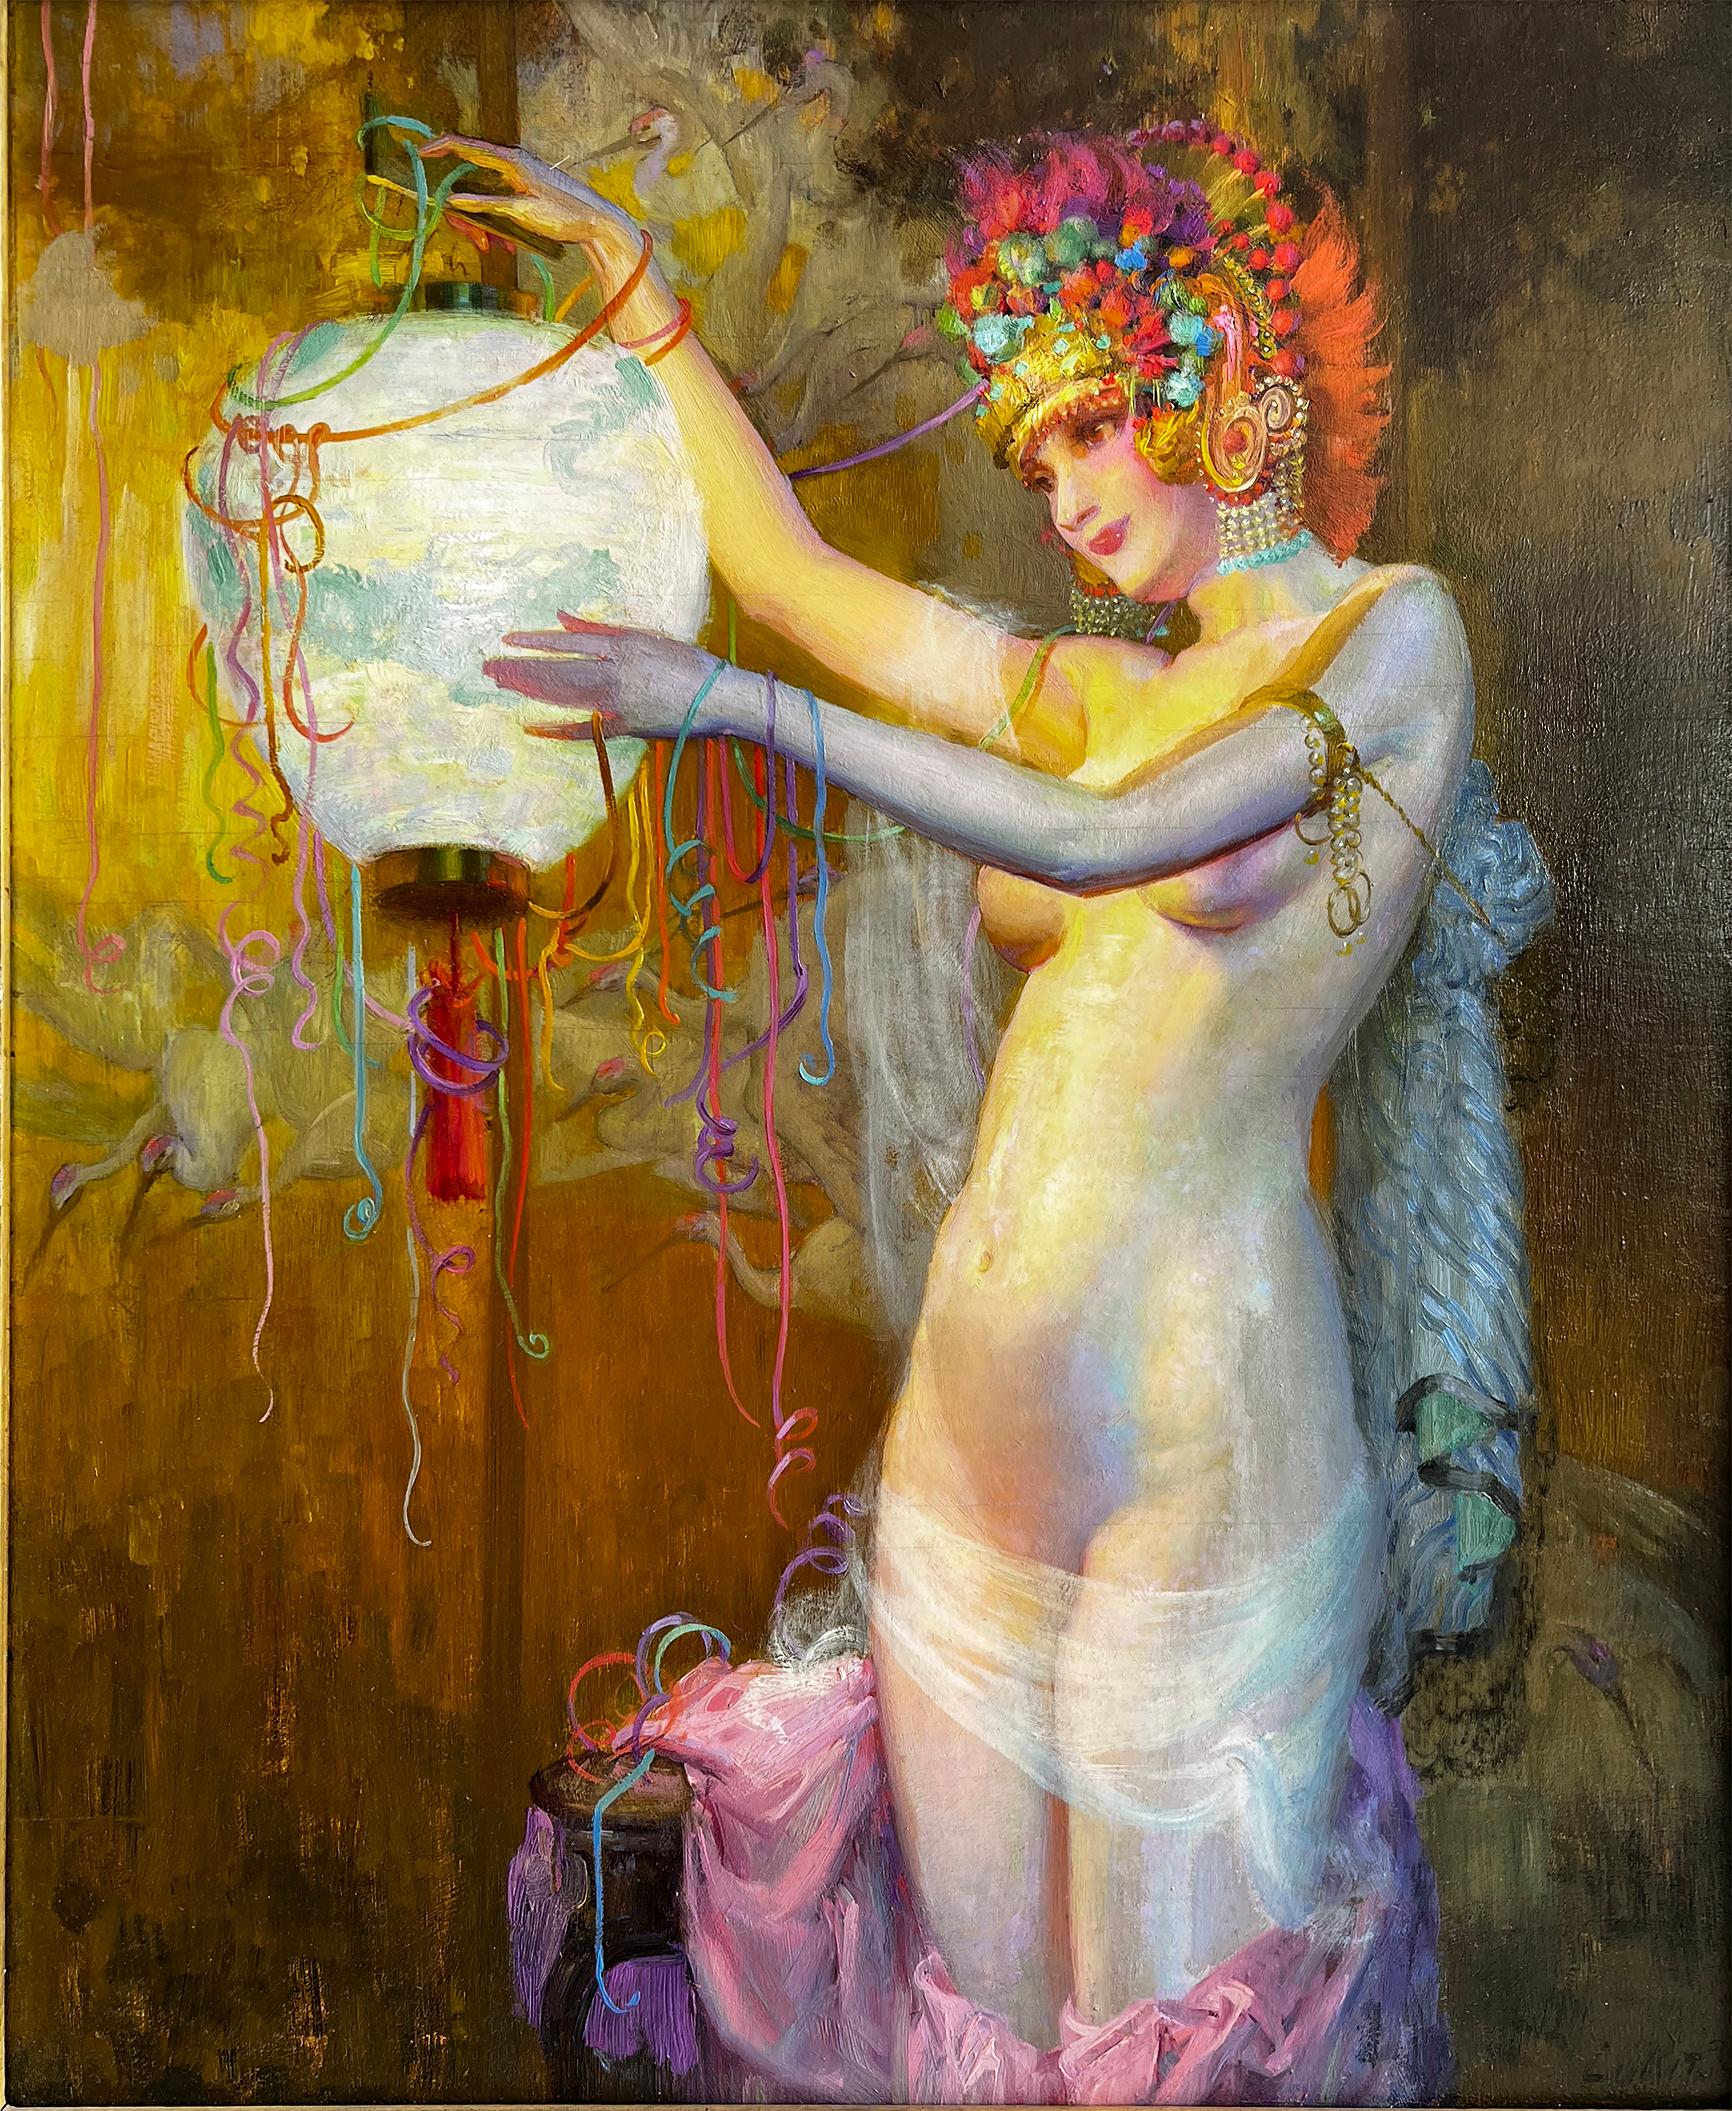 Nude Dancer with Ornate Floral  Headdress and Japanese Lantern  - Carnival 